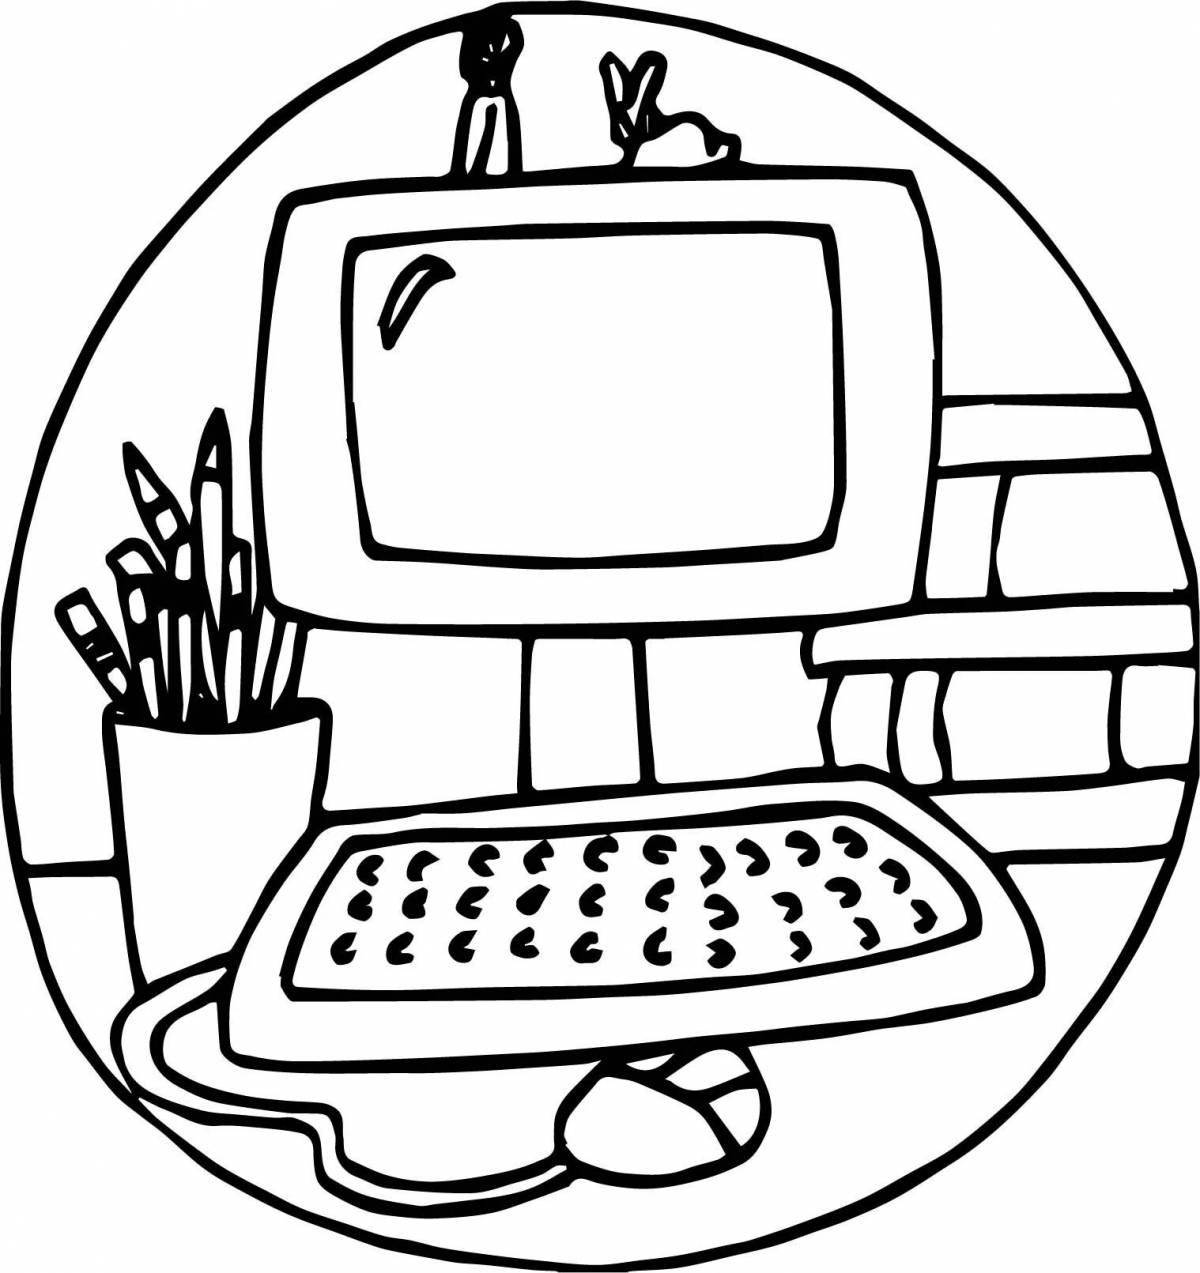 Fun coloring book for computer science